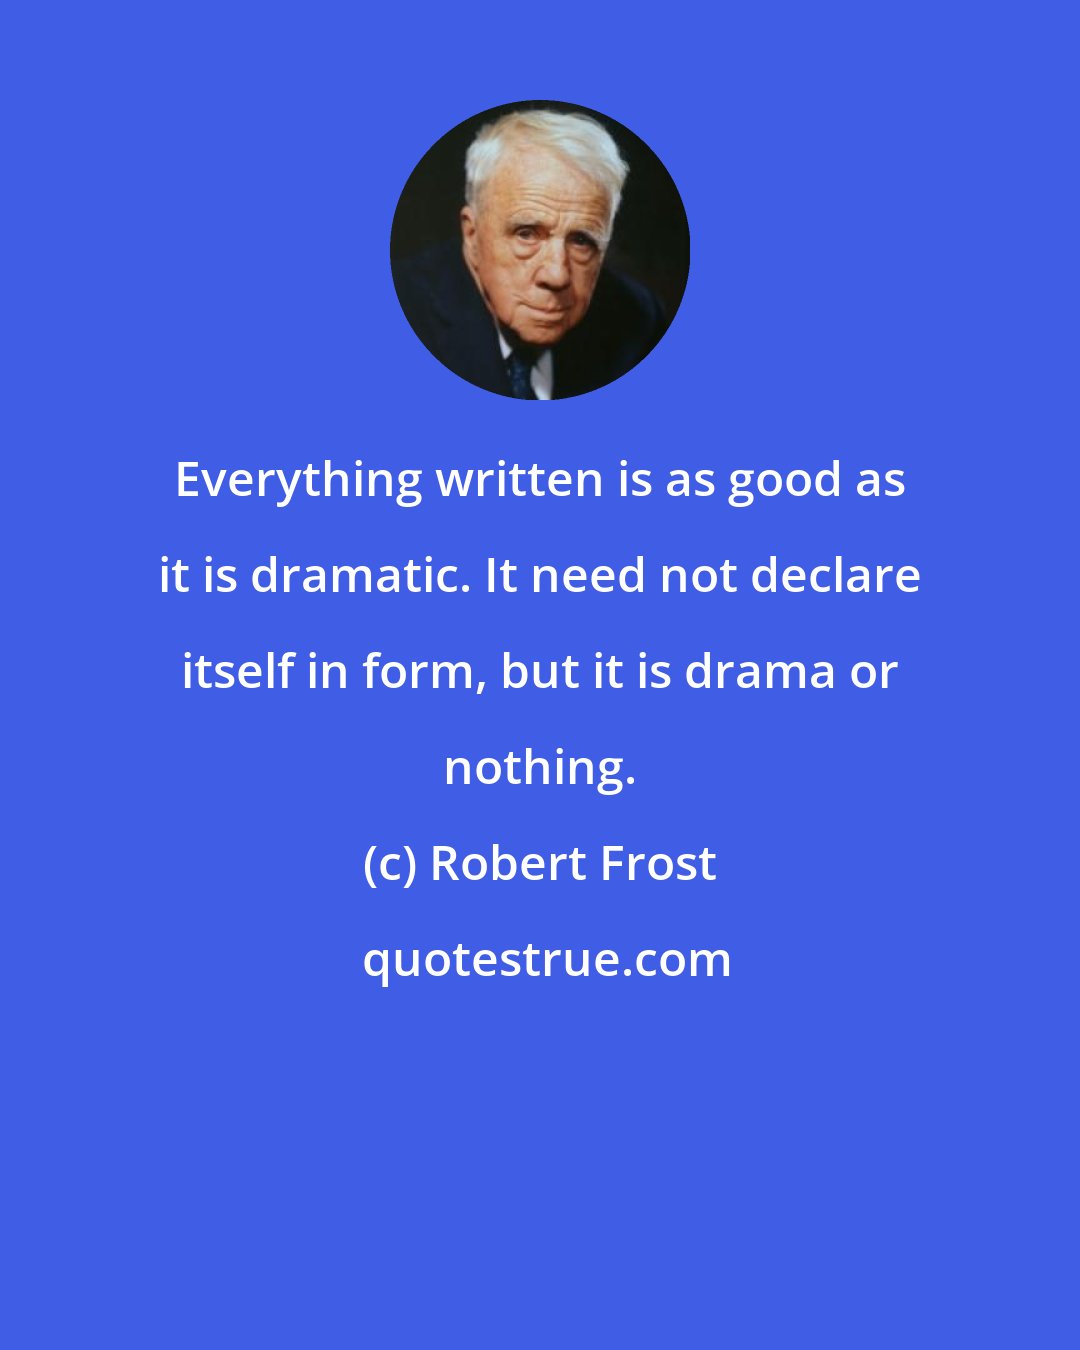 Robert Frost: Everything written is as good as it is dramatic. It need not declare itself in form, but it is drama or nothing.